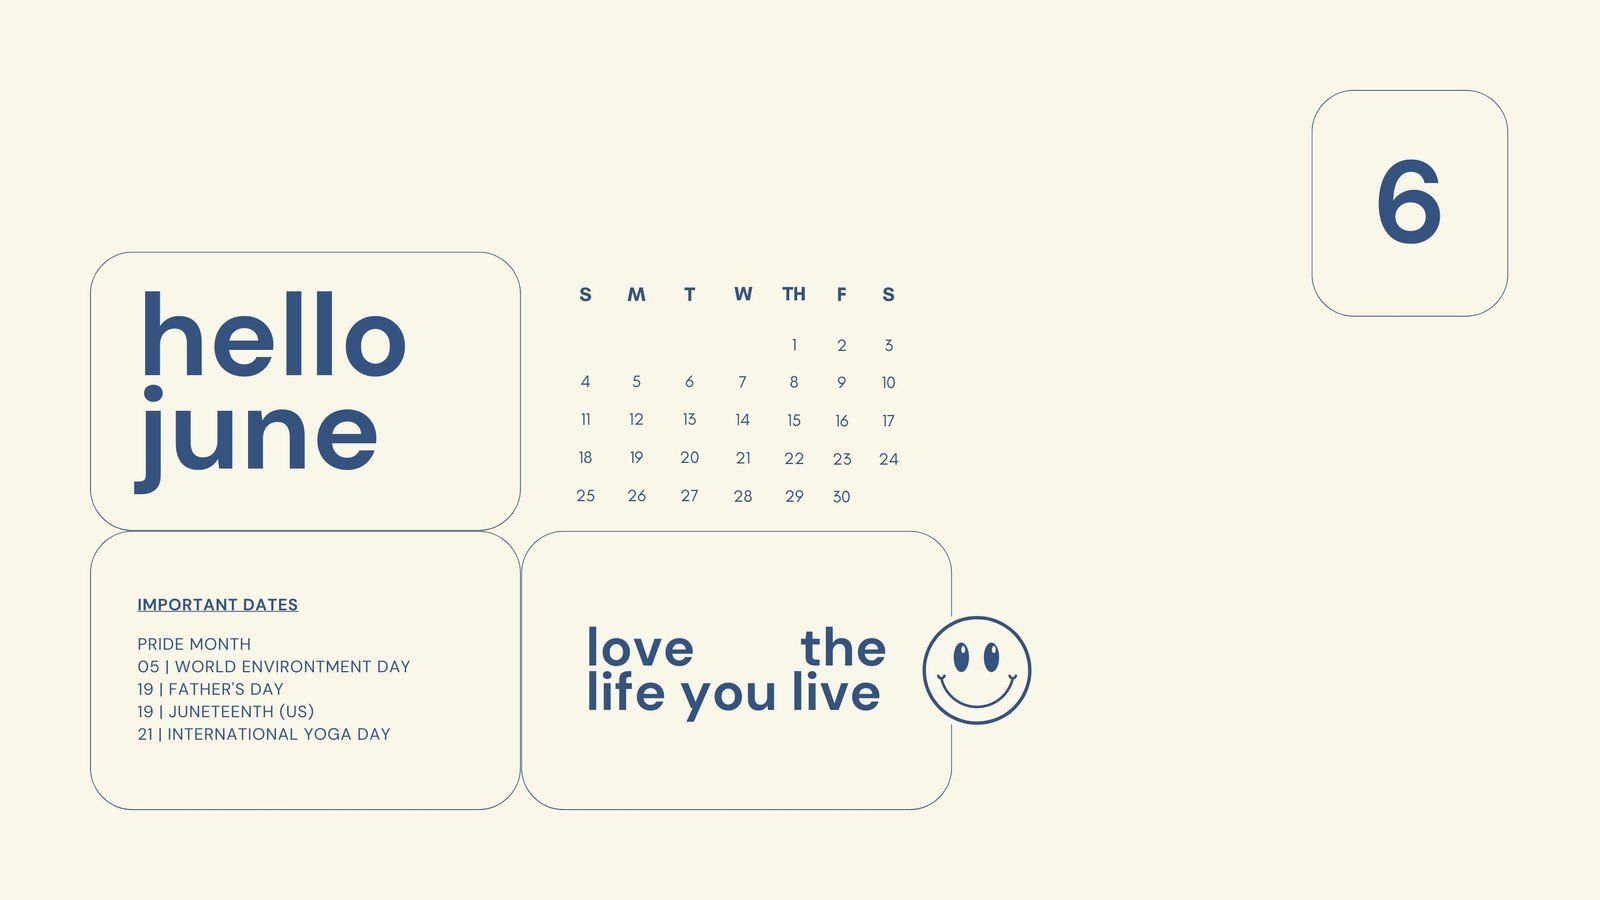 June Desktop Wallpaper with Important Dates, Love the Life You Live, and a Smiley Face - Minimalist